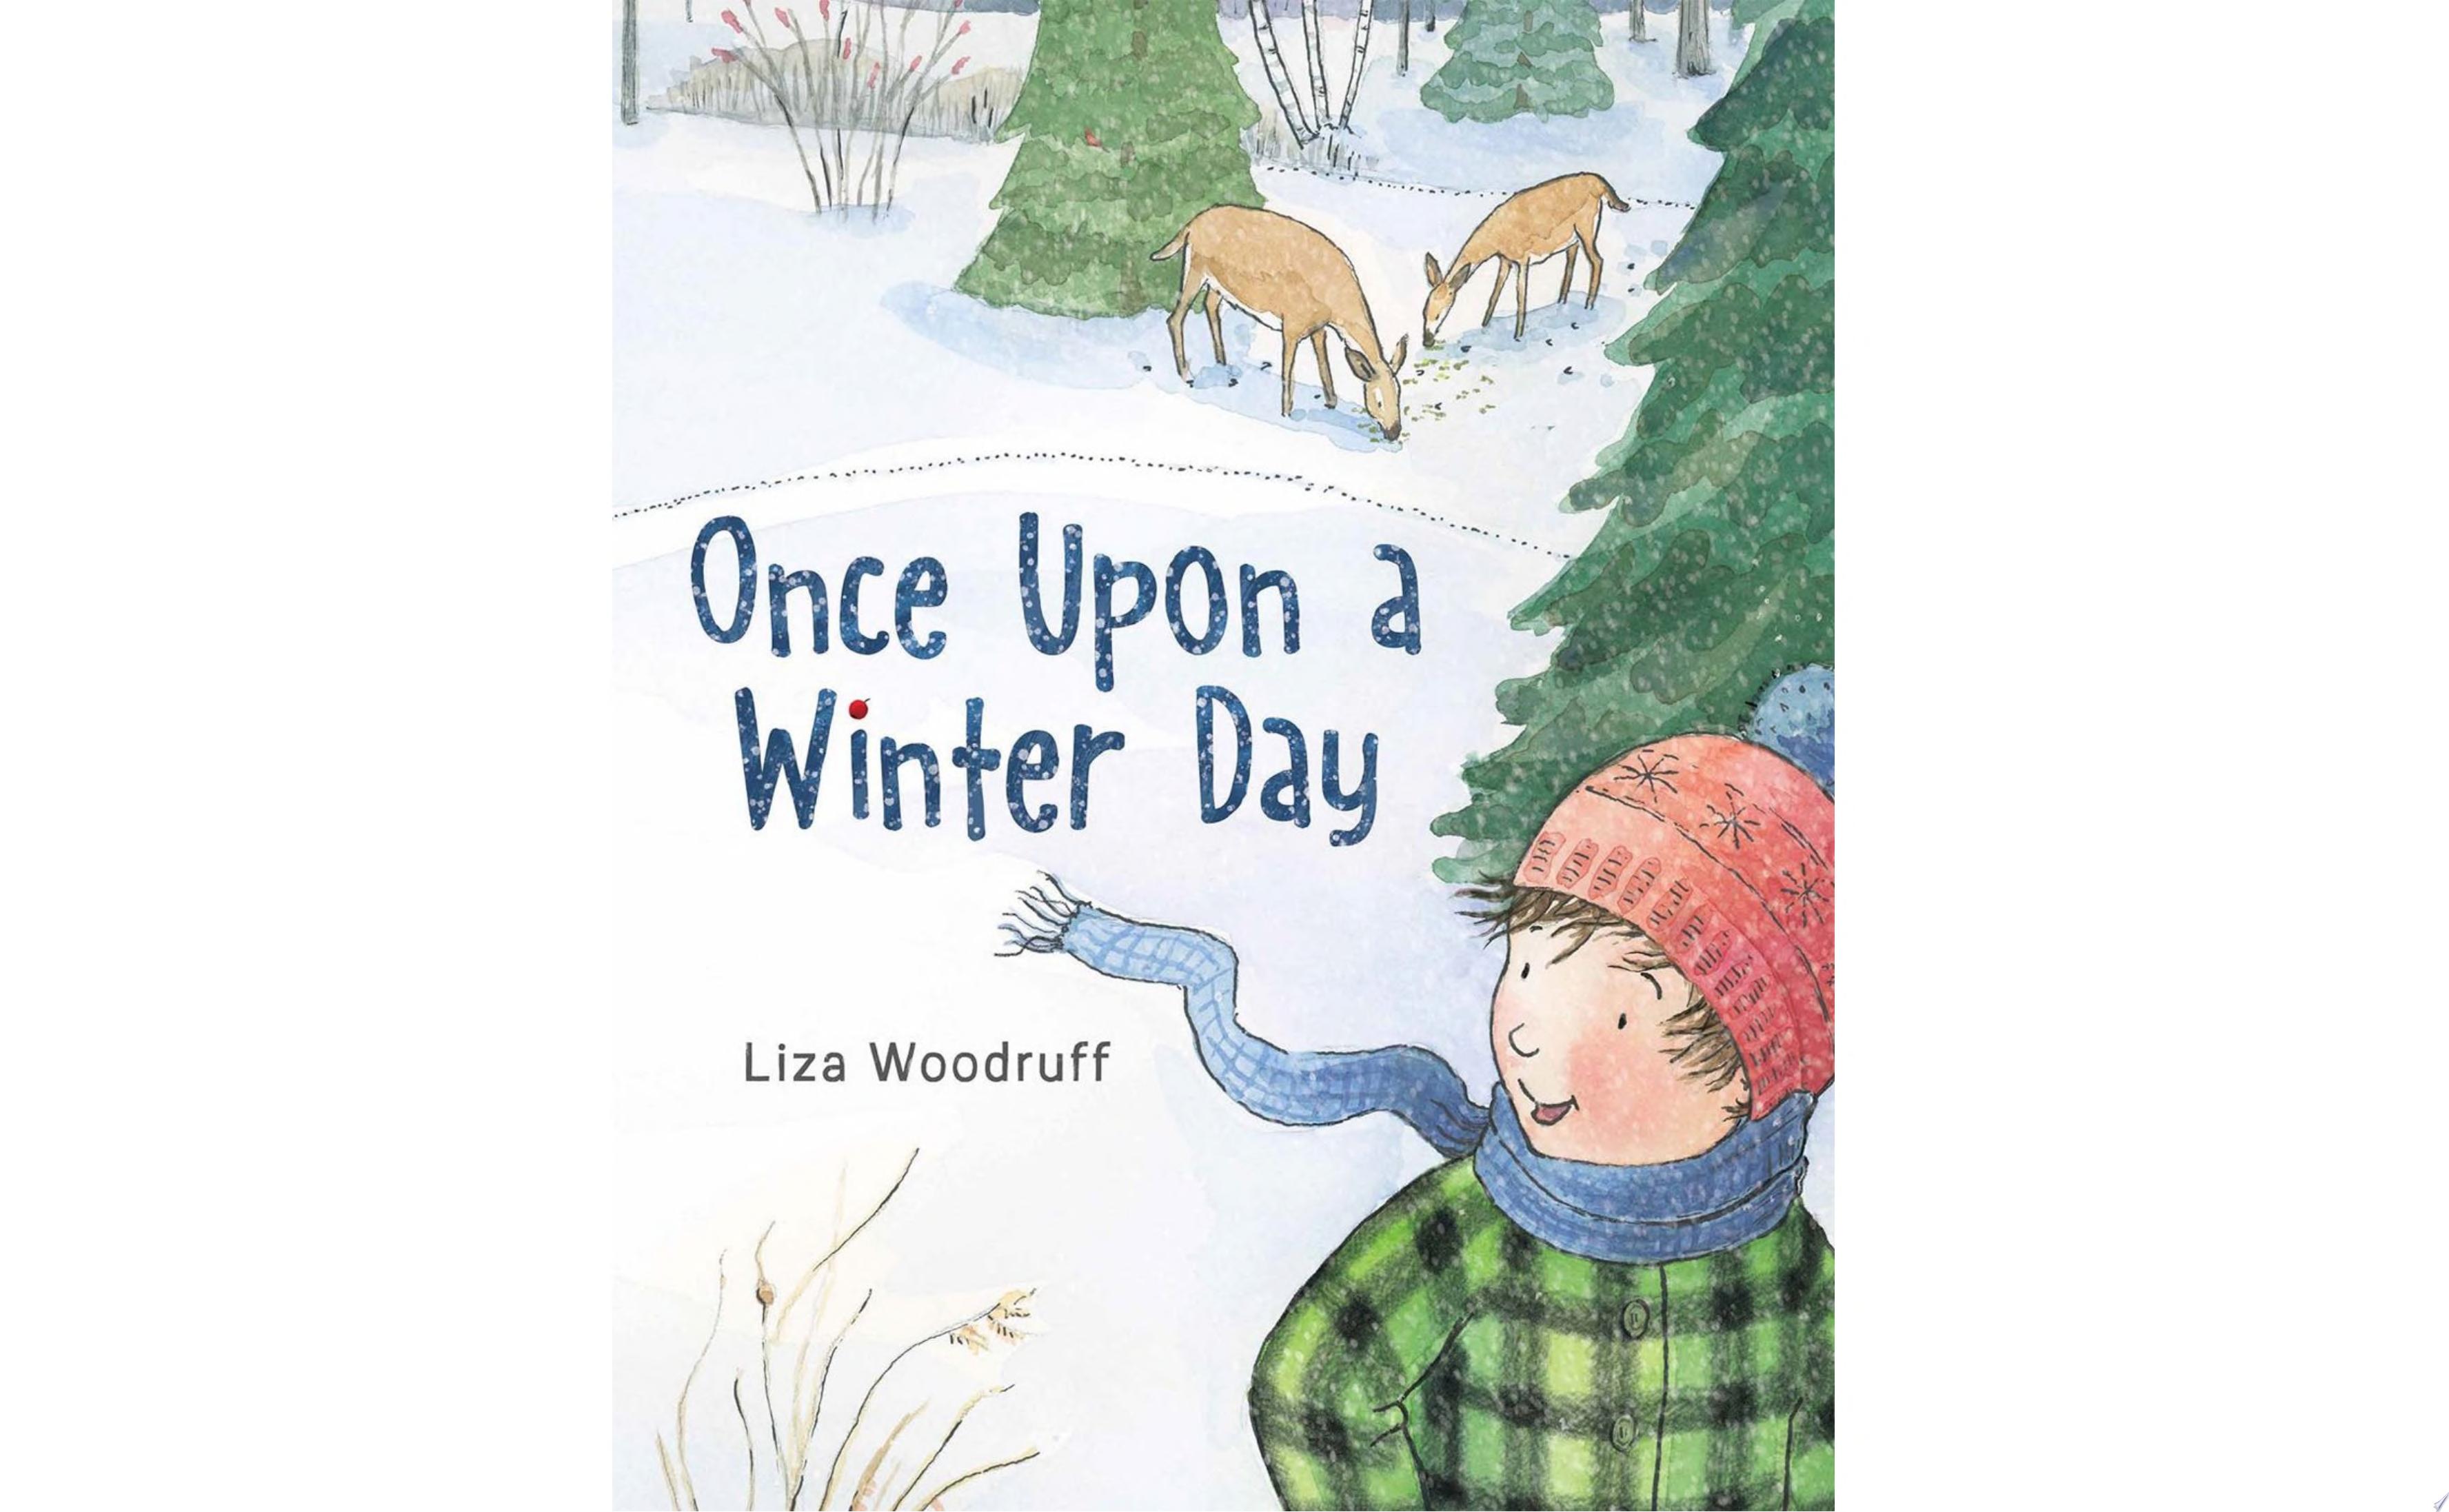 Image for "Once Upon a Winter Day"